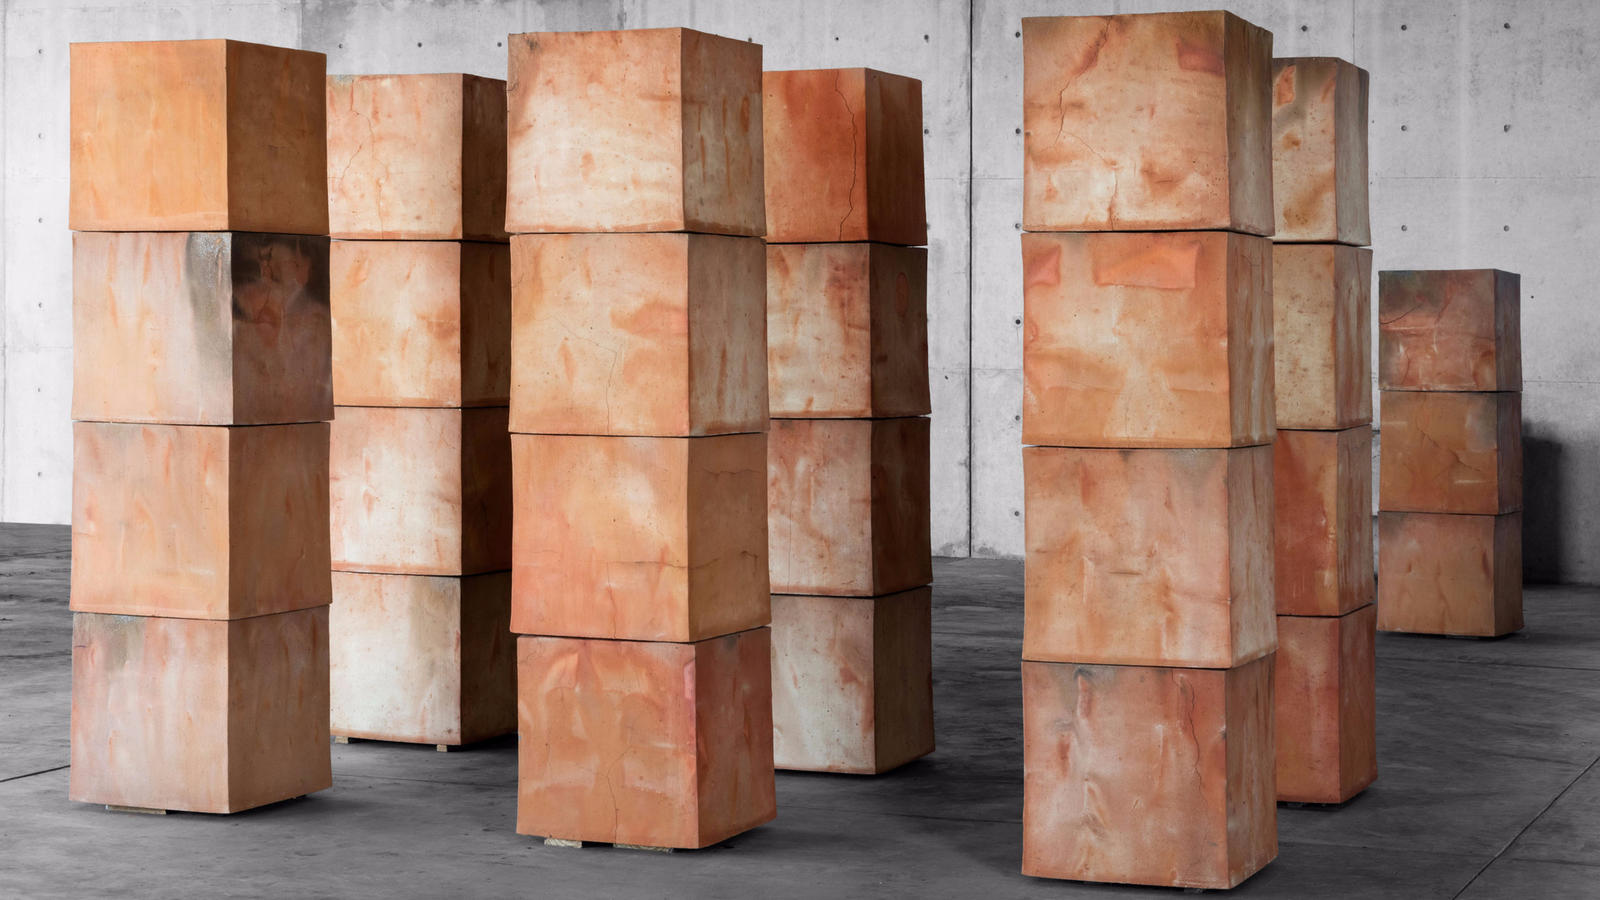 Untitled clay cubes by Bosco Sodi, on view as part of a pop-up exhibition in Los Angeles.